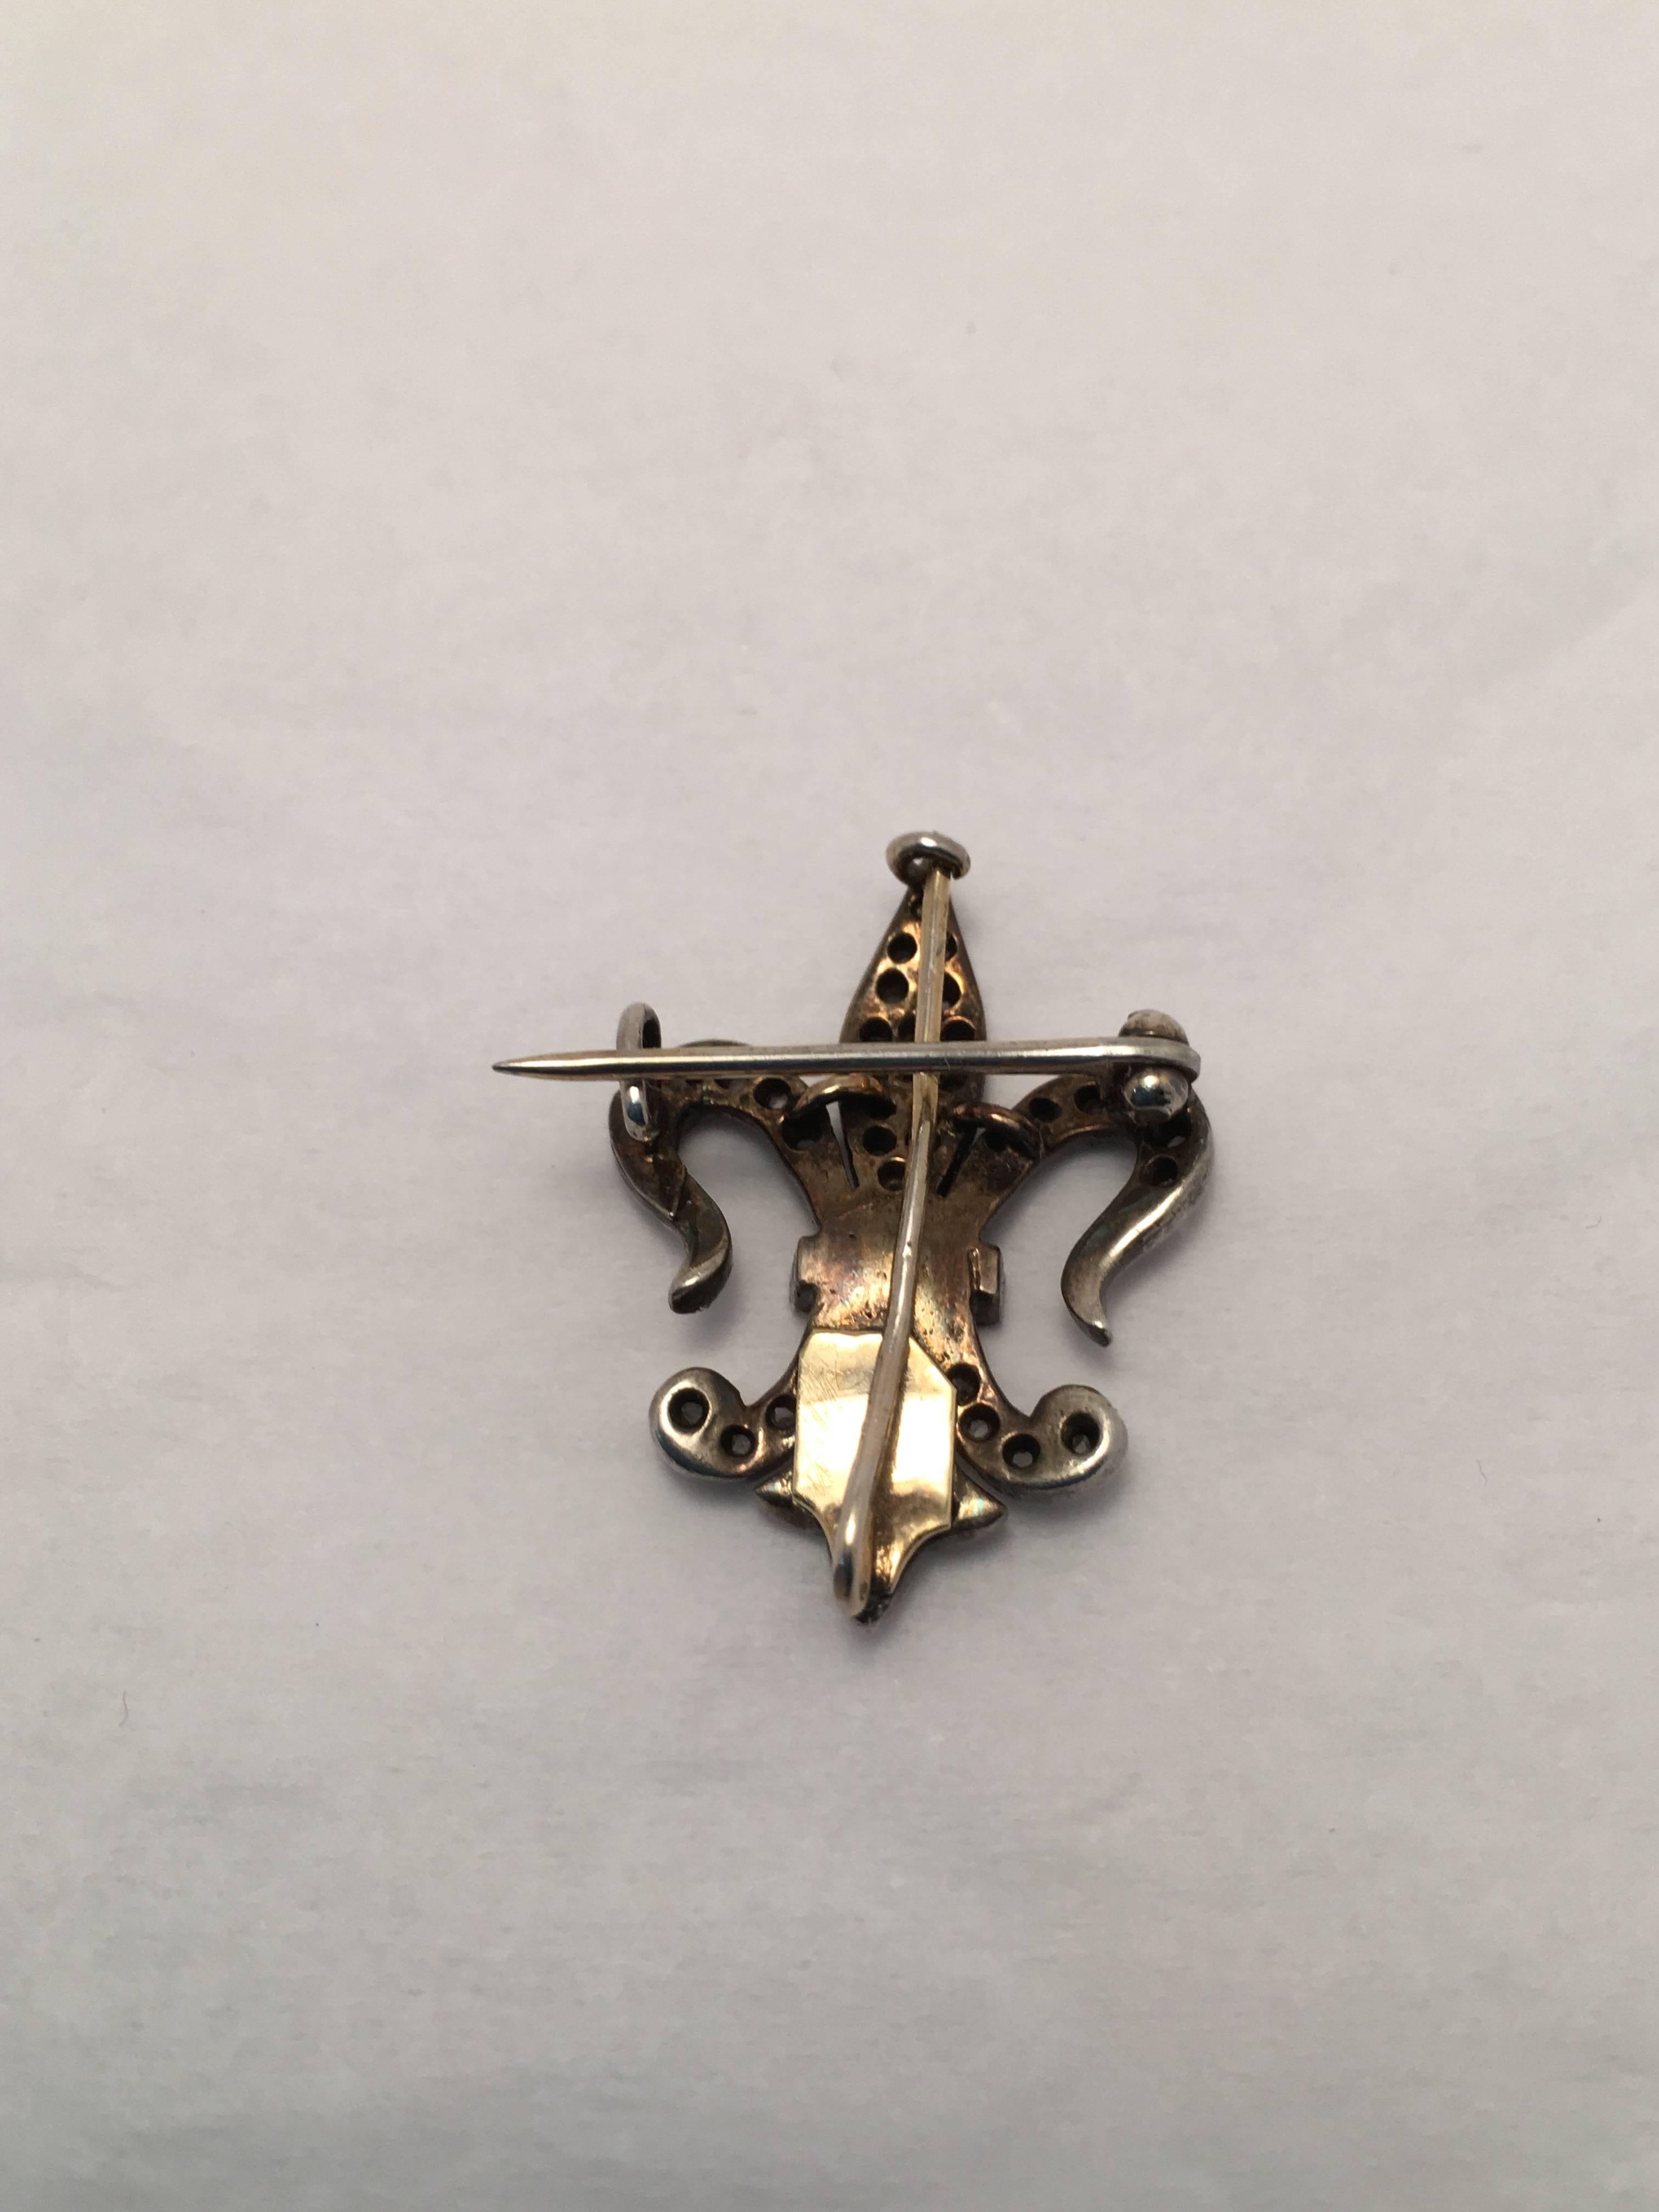 14 kt. yellow gold and silver Fleur de Lis watch hanger set with 67 rose cut diamonds weighing approximately 1.00 ct. total weight. This piece has wonderful milgrain details and pin assembly closes via 